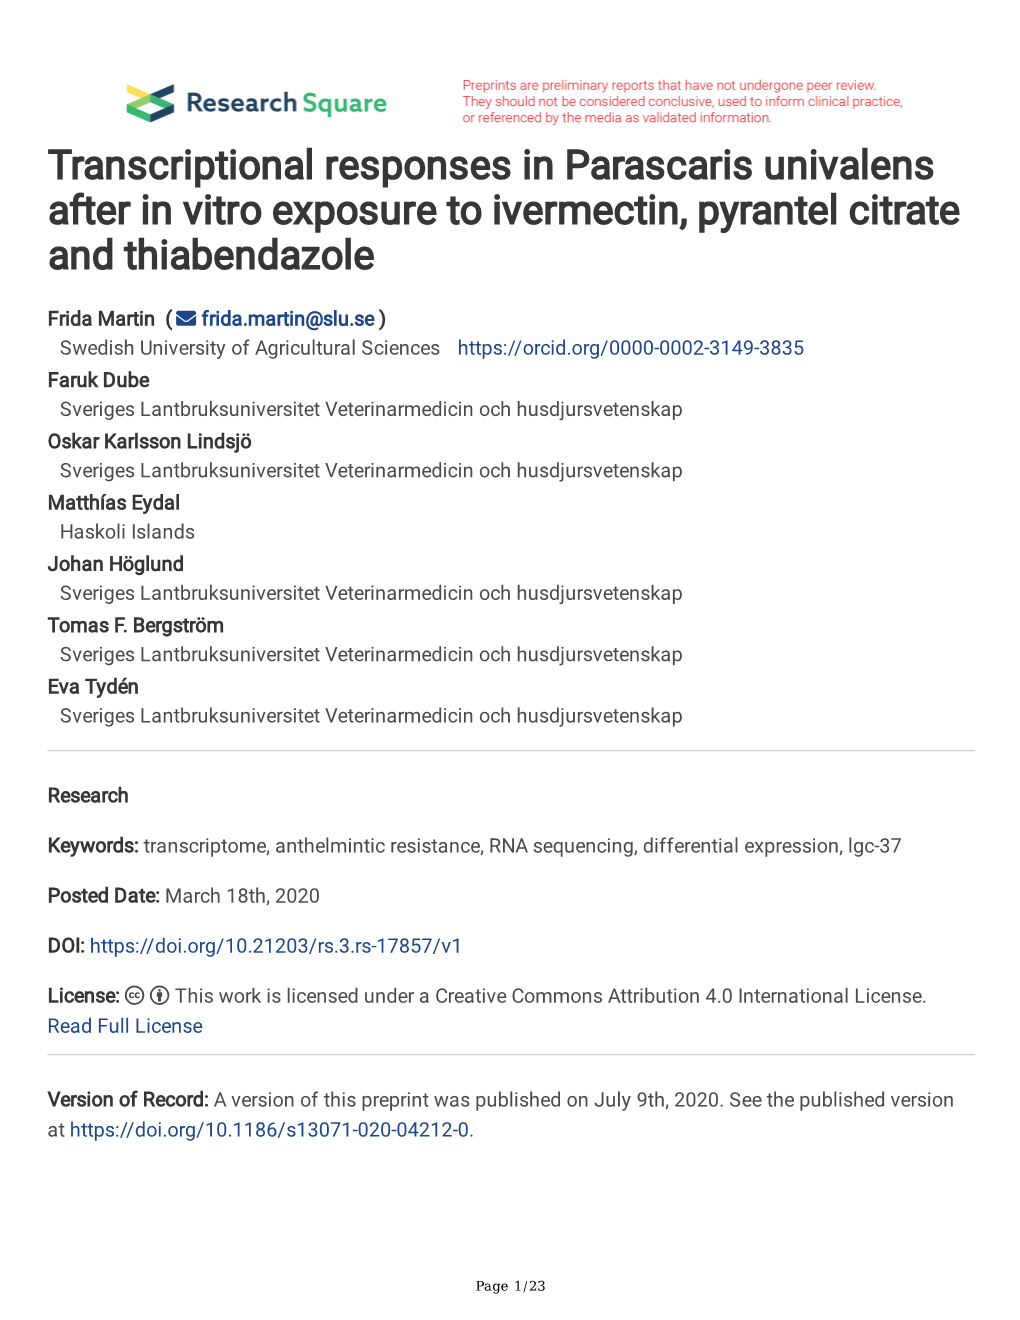 Parascaris Univalens After in Vitro Exposure to Ivermectin, Pyrantel Citrate and Thiabendazole